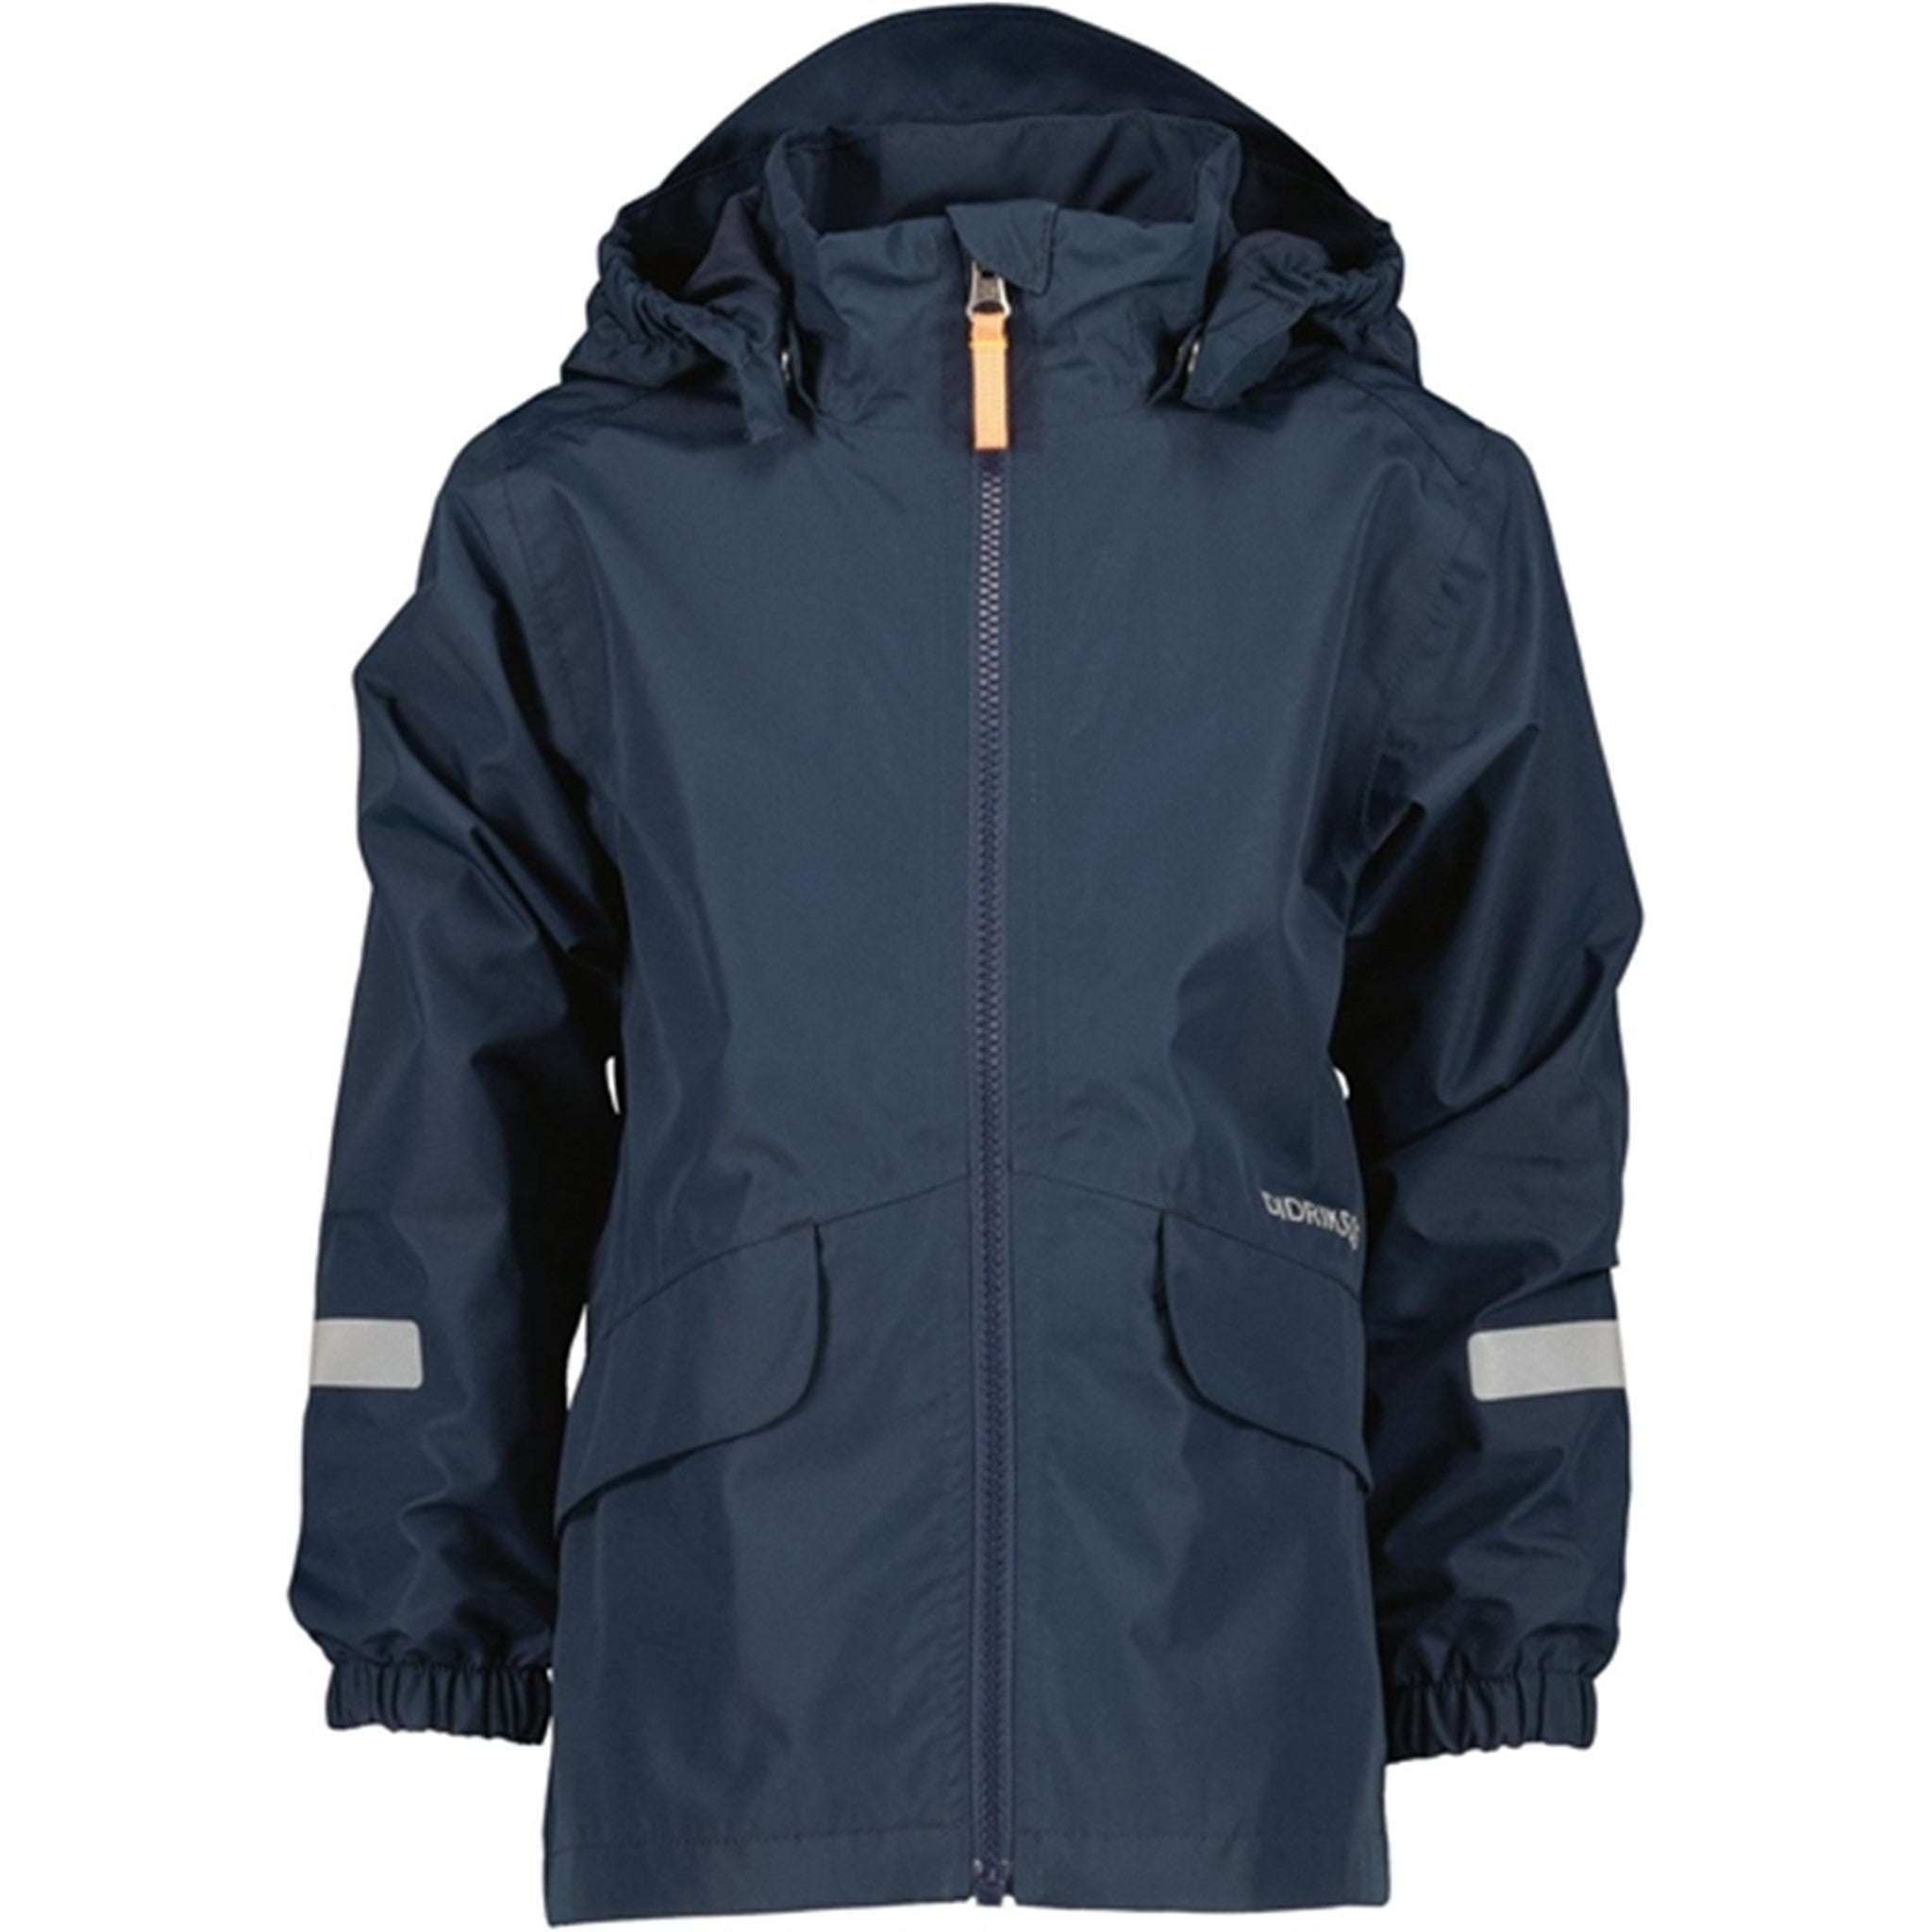 Didriksons Norma Navy Jacket